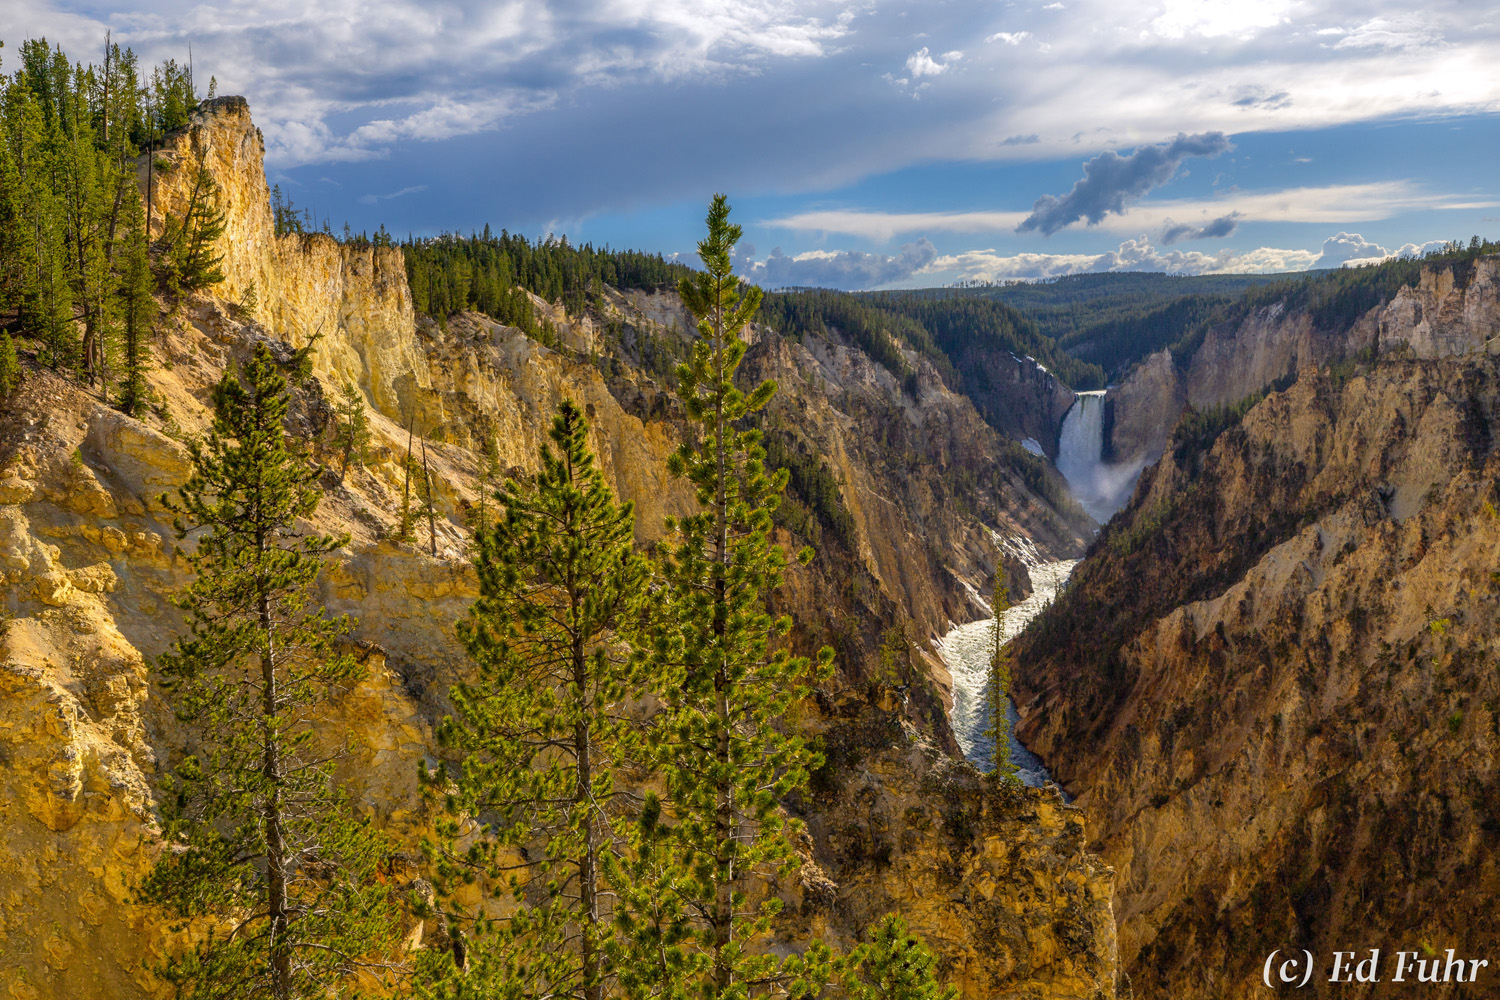 Evening lights brings added warmth to the limestone and shale rock of the Grand Canyon of Yellowstone, with Lower Falls in the...